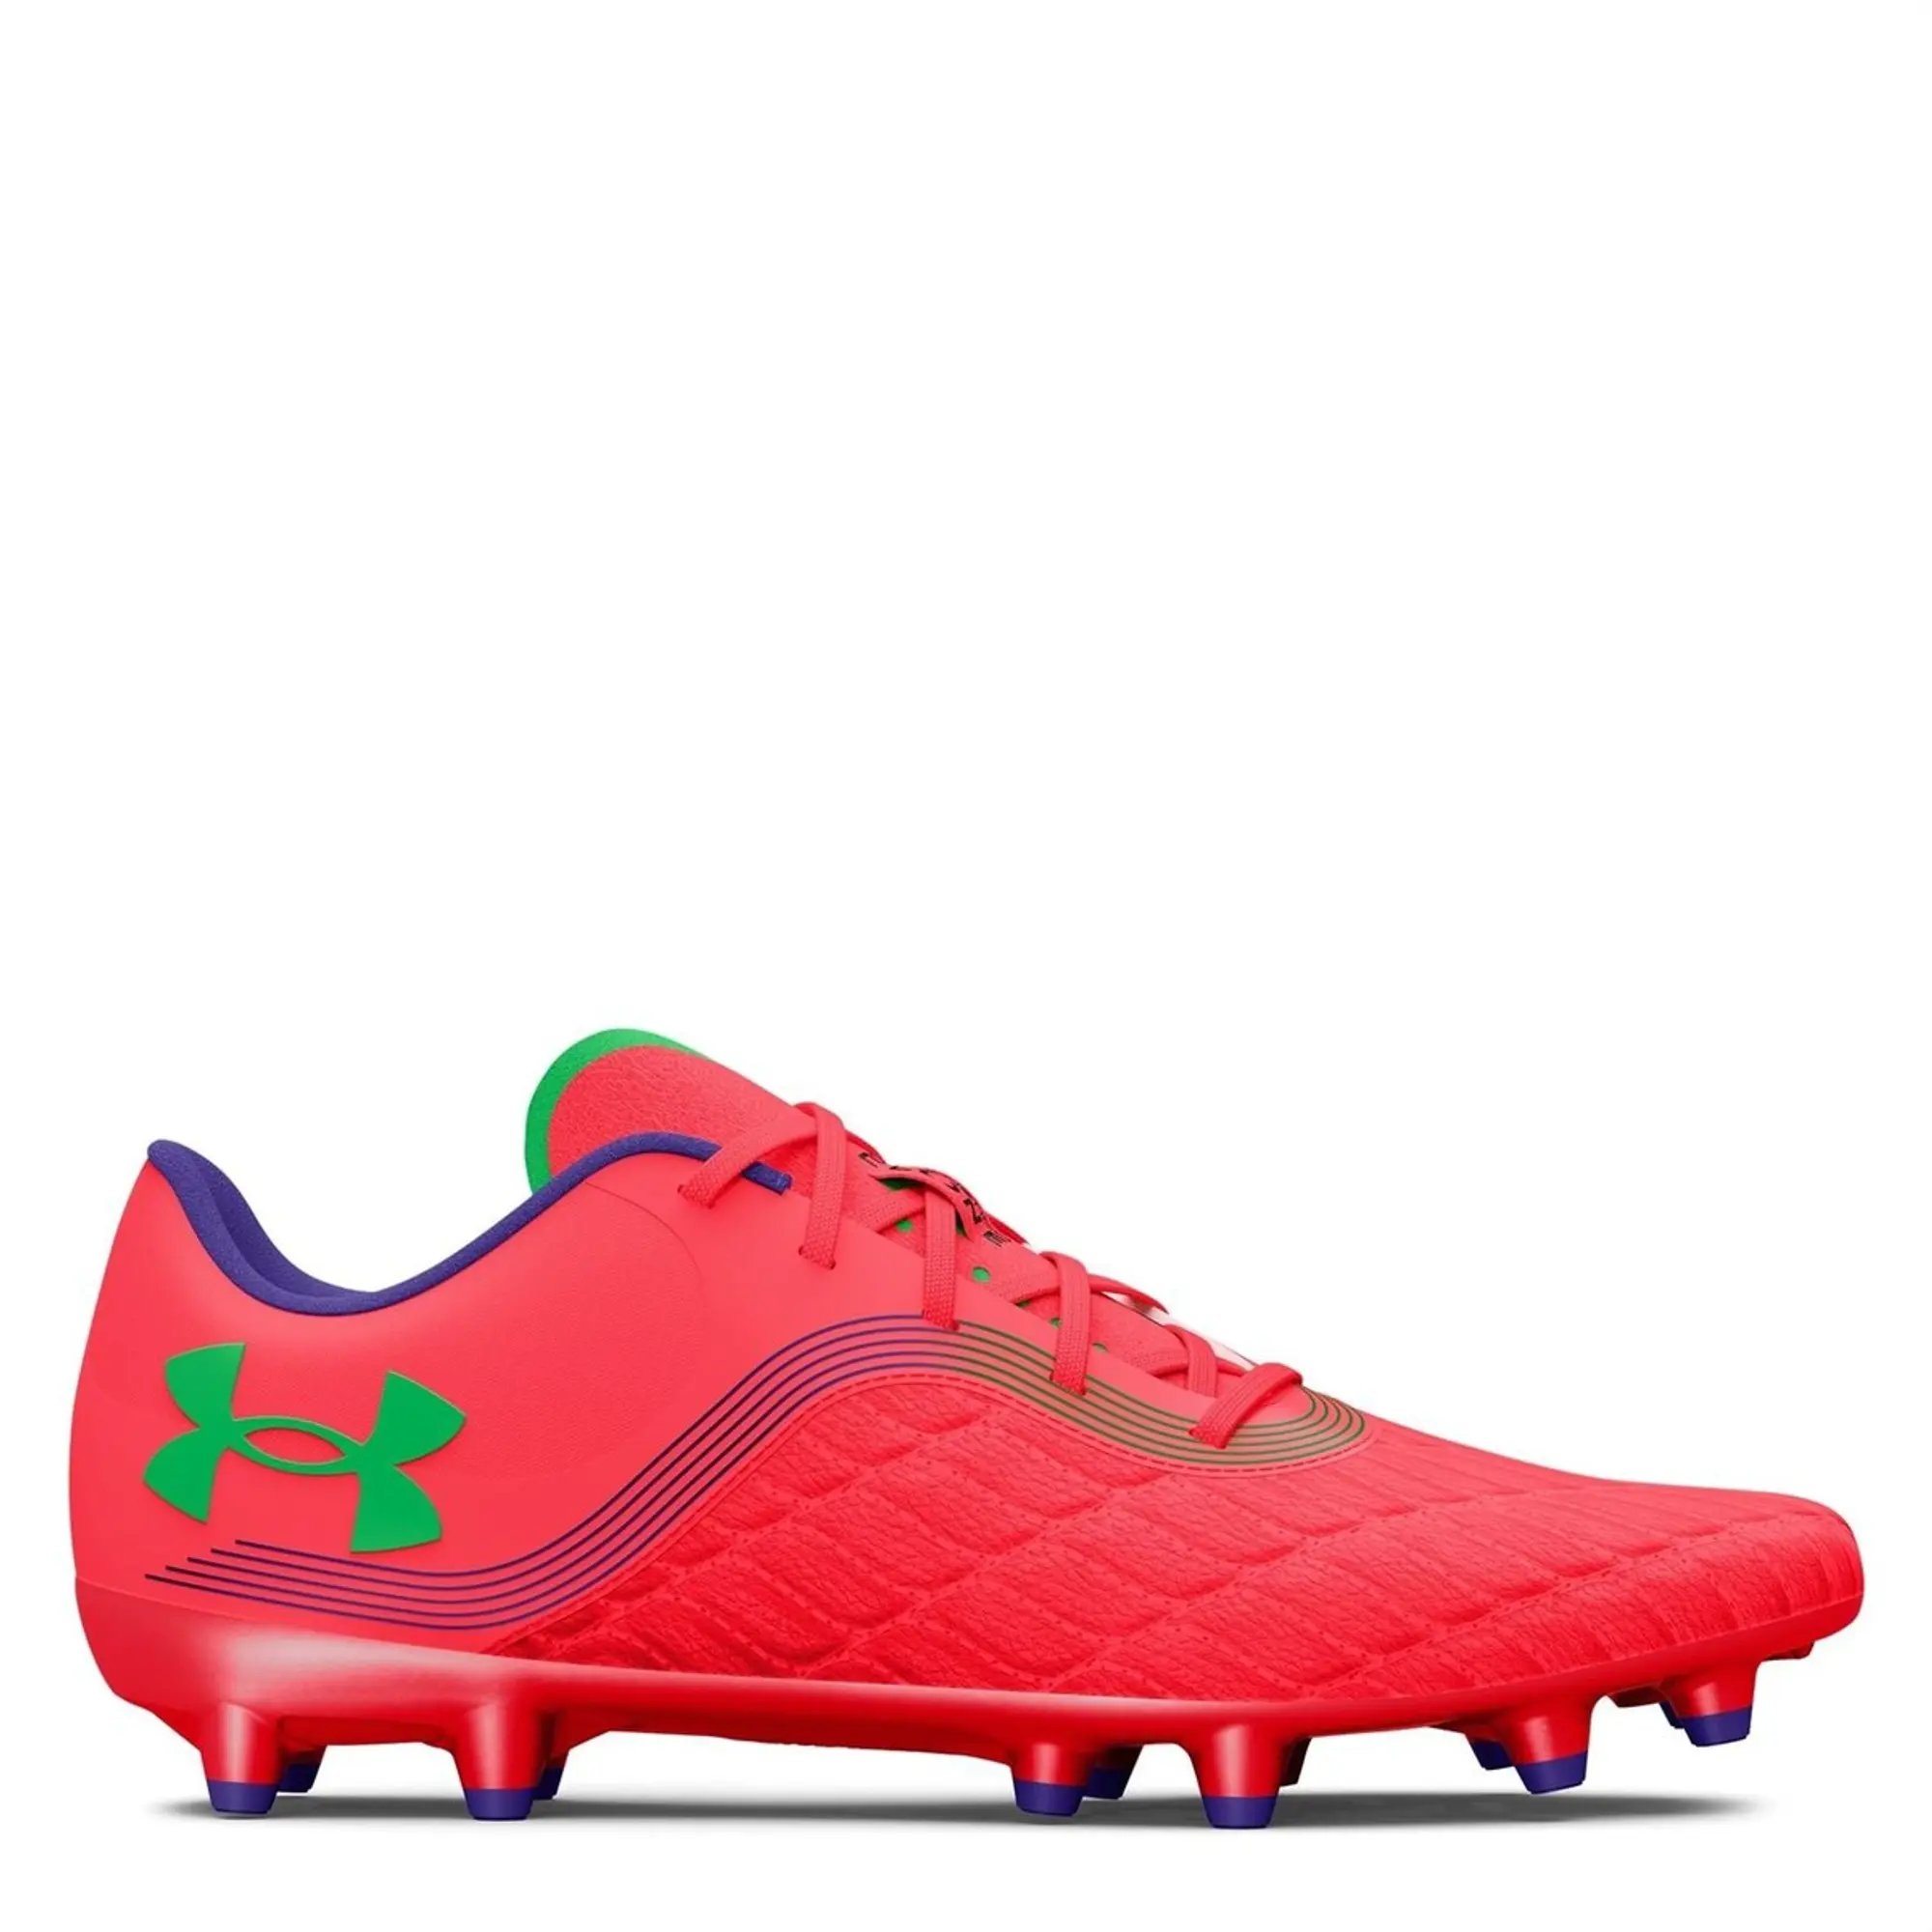 Under Armour Clone Magnetico Pro Firm Ground Football Boots